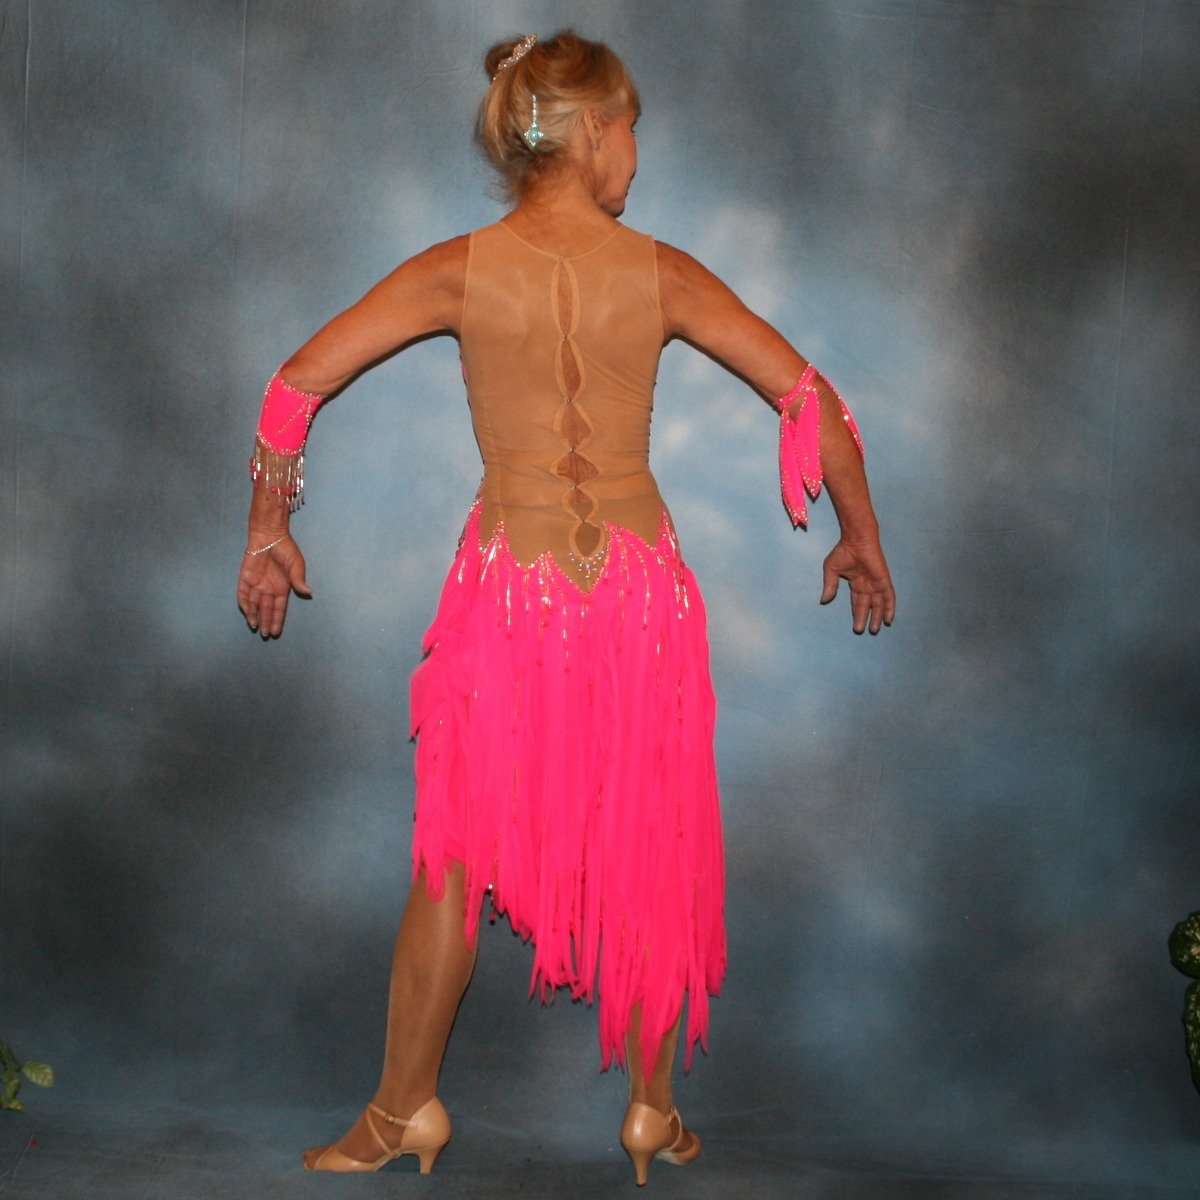 Crystal's Creations back view of Hot pink Latin dress created of hot pink tricot chiffon overlayed on nude illusion base with flame effect is embellished with CAB Sawovski rhinestones & hand beading on sale!